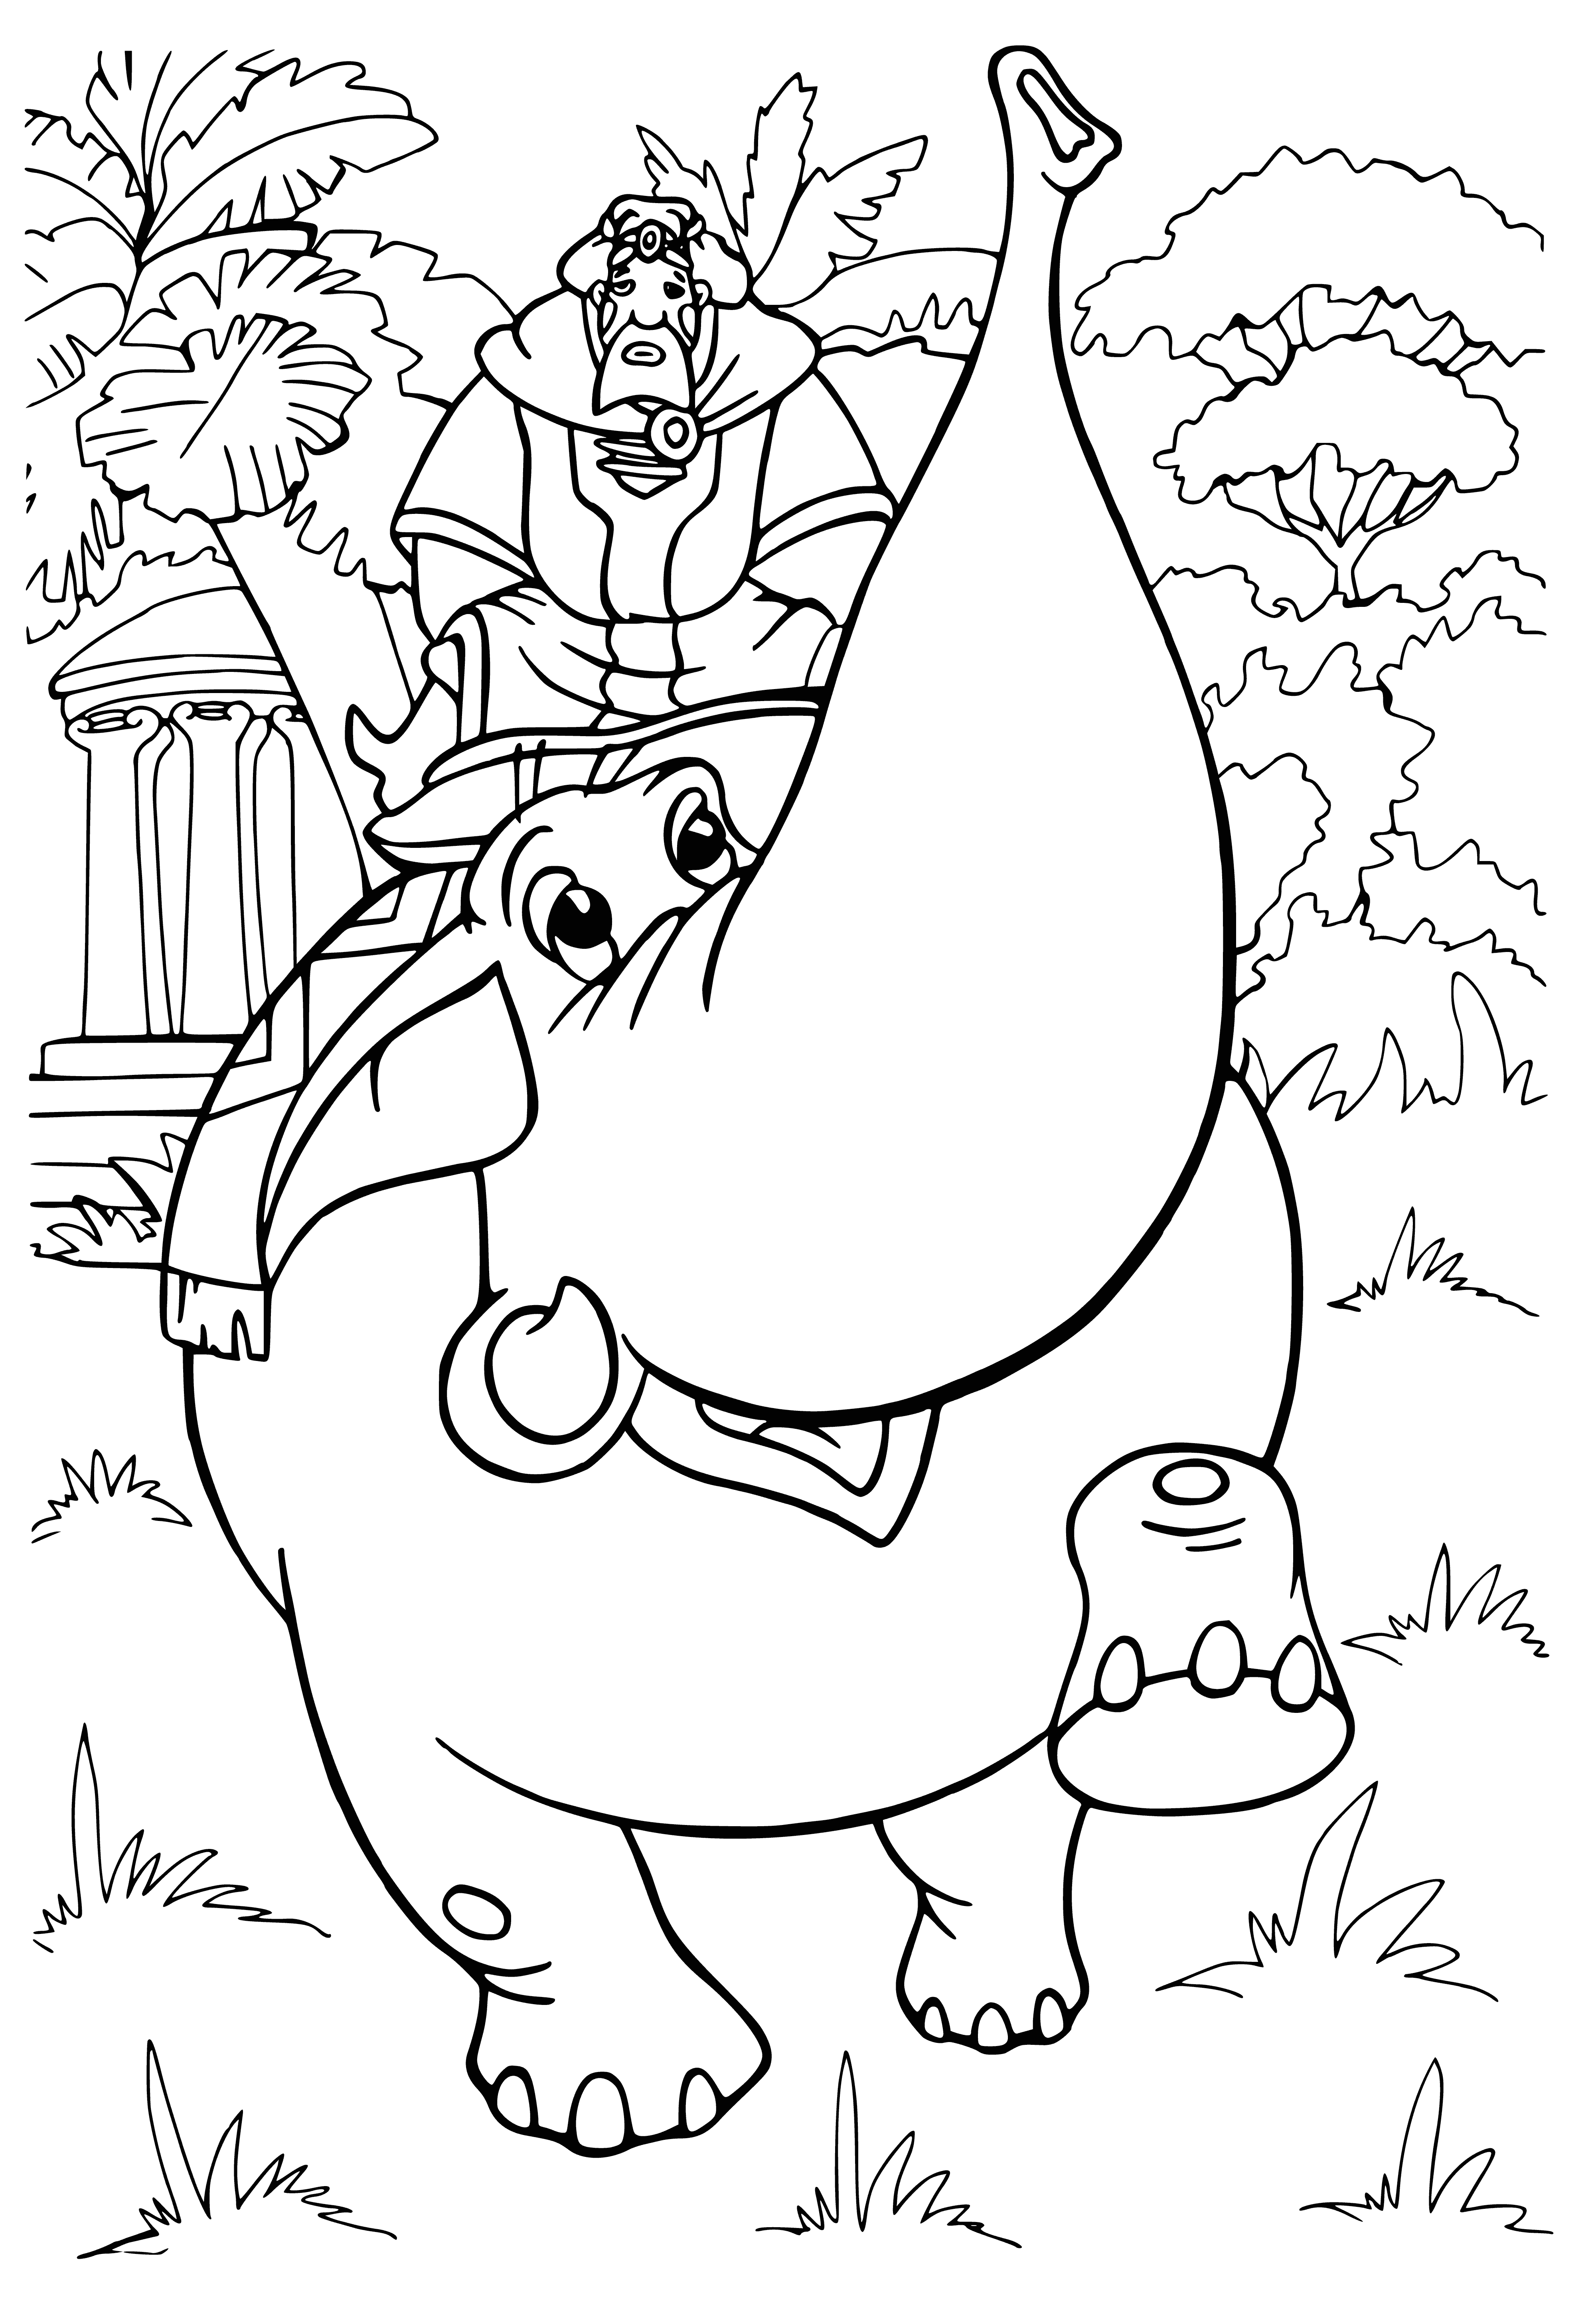 coloring page: Ilya & Nightingale riding an elephant w/ big ears, trunk & swords. They're on its back, ready for an adventure!